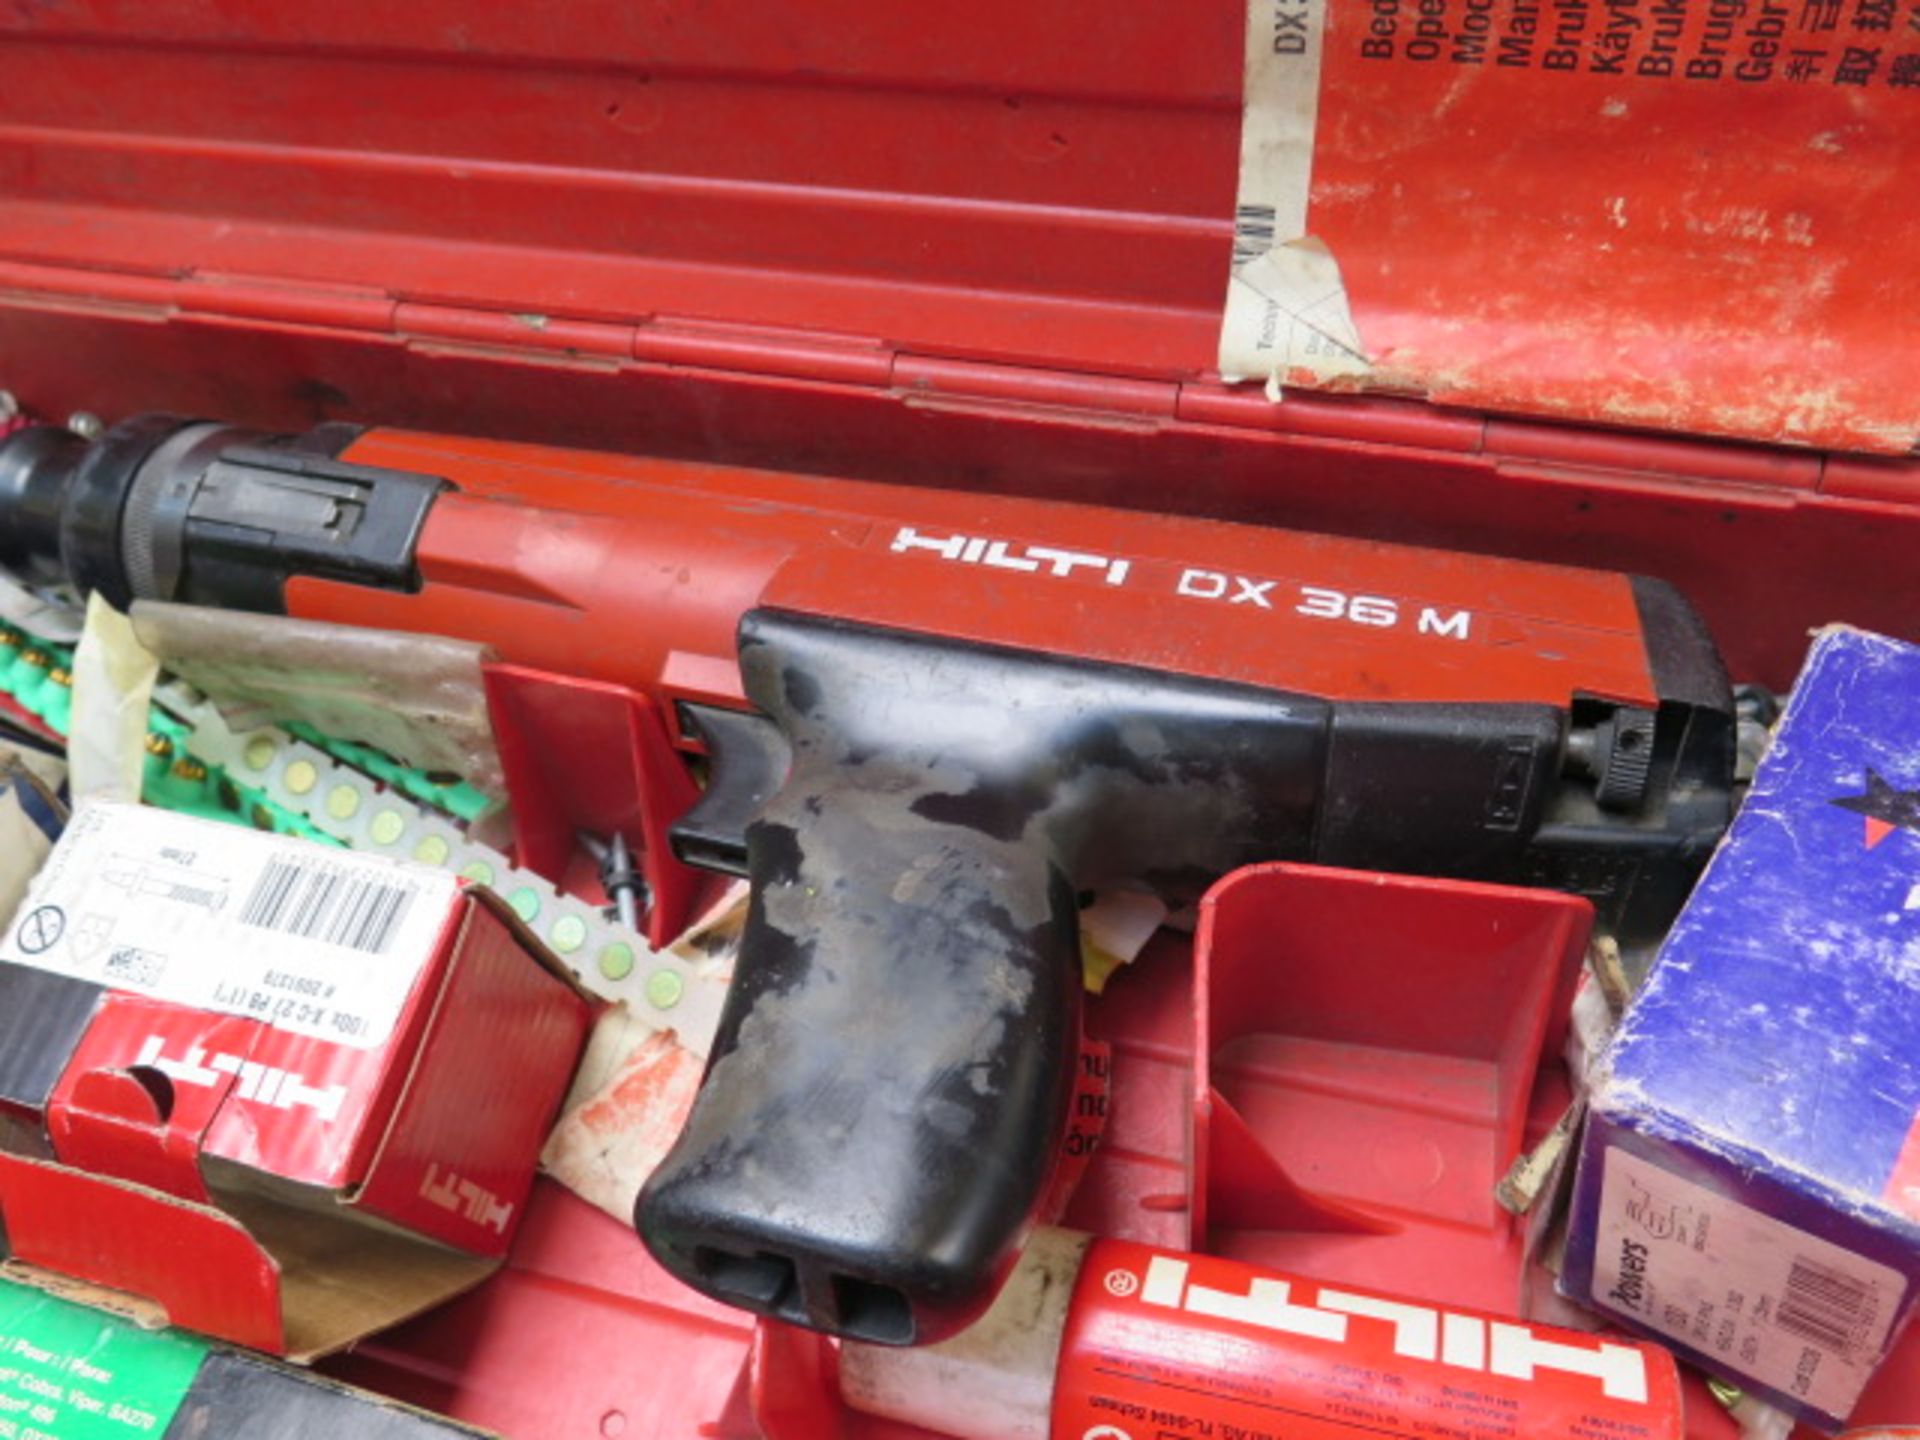 Hilti DX36M Powder Shot Tool w/ Acces (SOLD AS-IS - NO WARRANTY) - Image 4 of 7